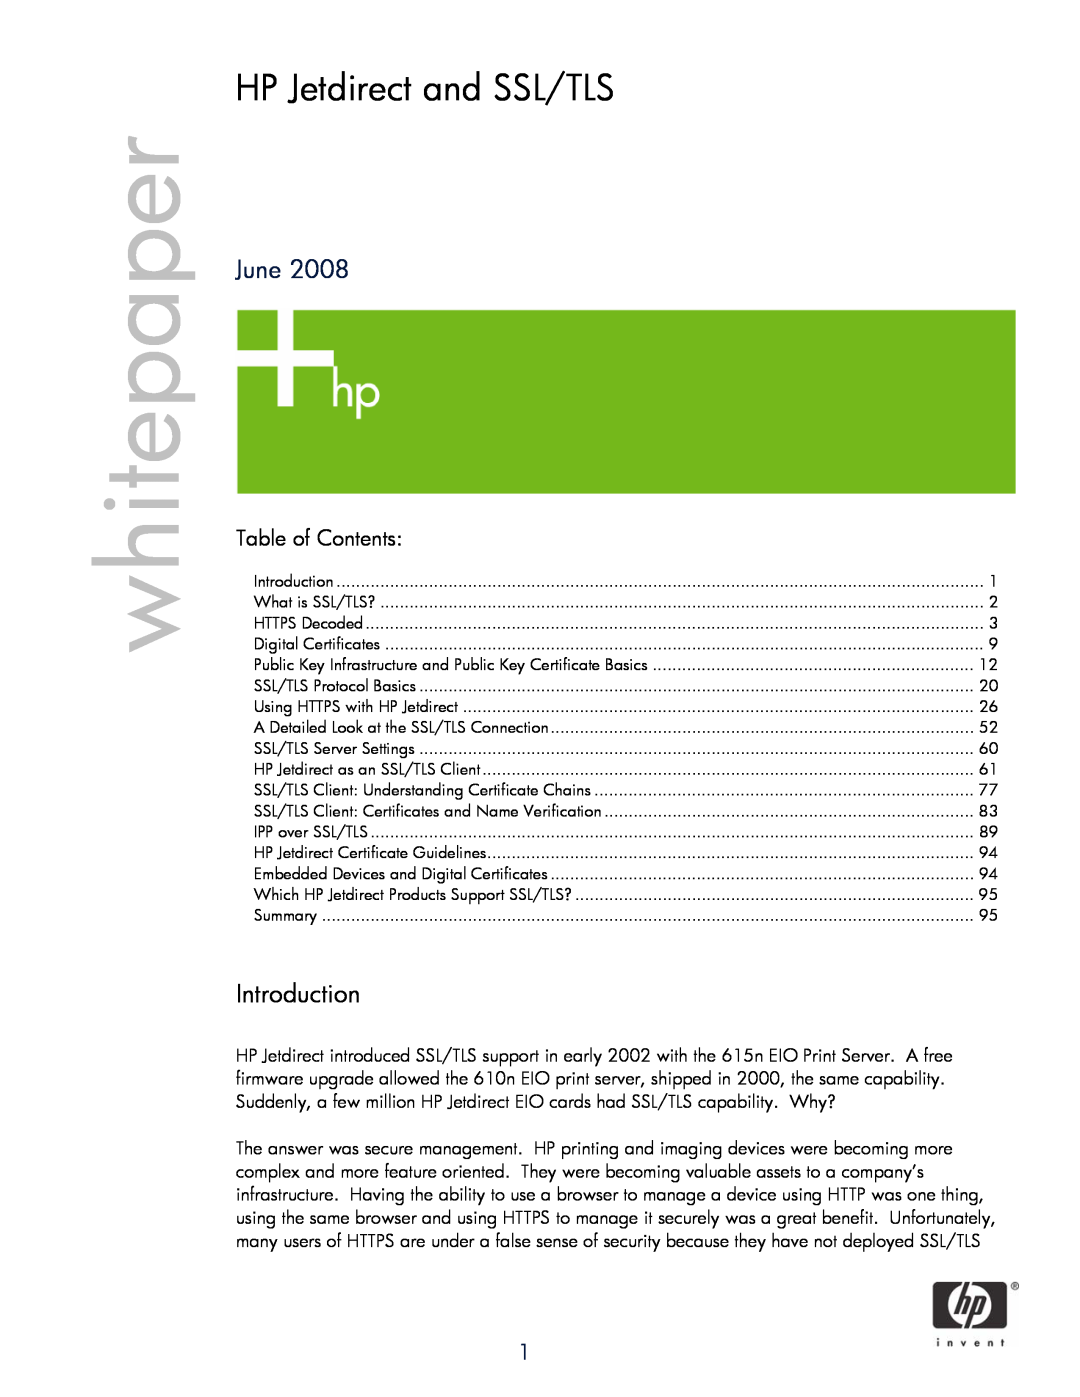 HP 250m Print Server for Fast Ethernet manual Introduction, whitepaper, HP Jetdirect and SSL/TLS, June, Table of Contents 